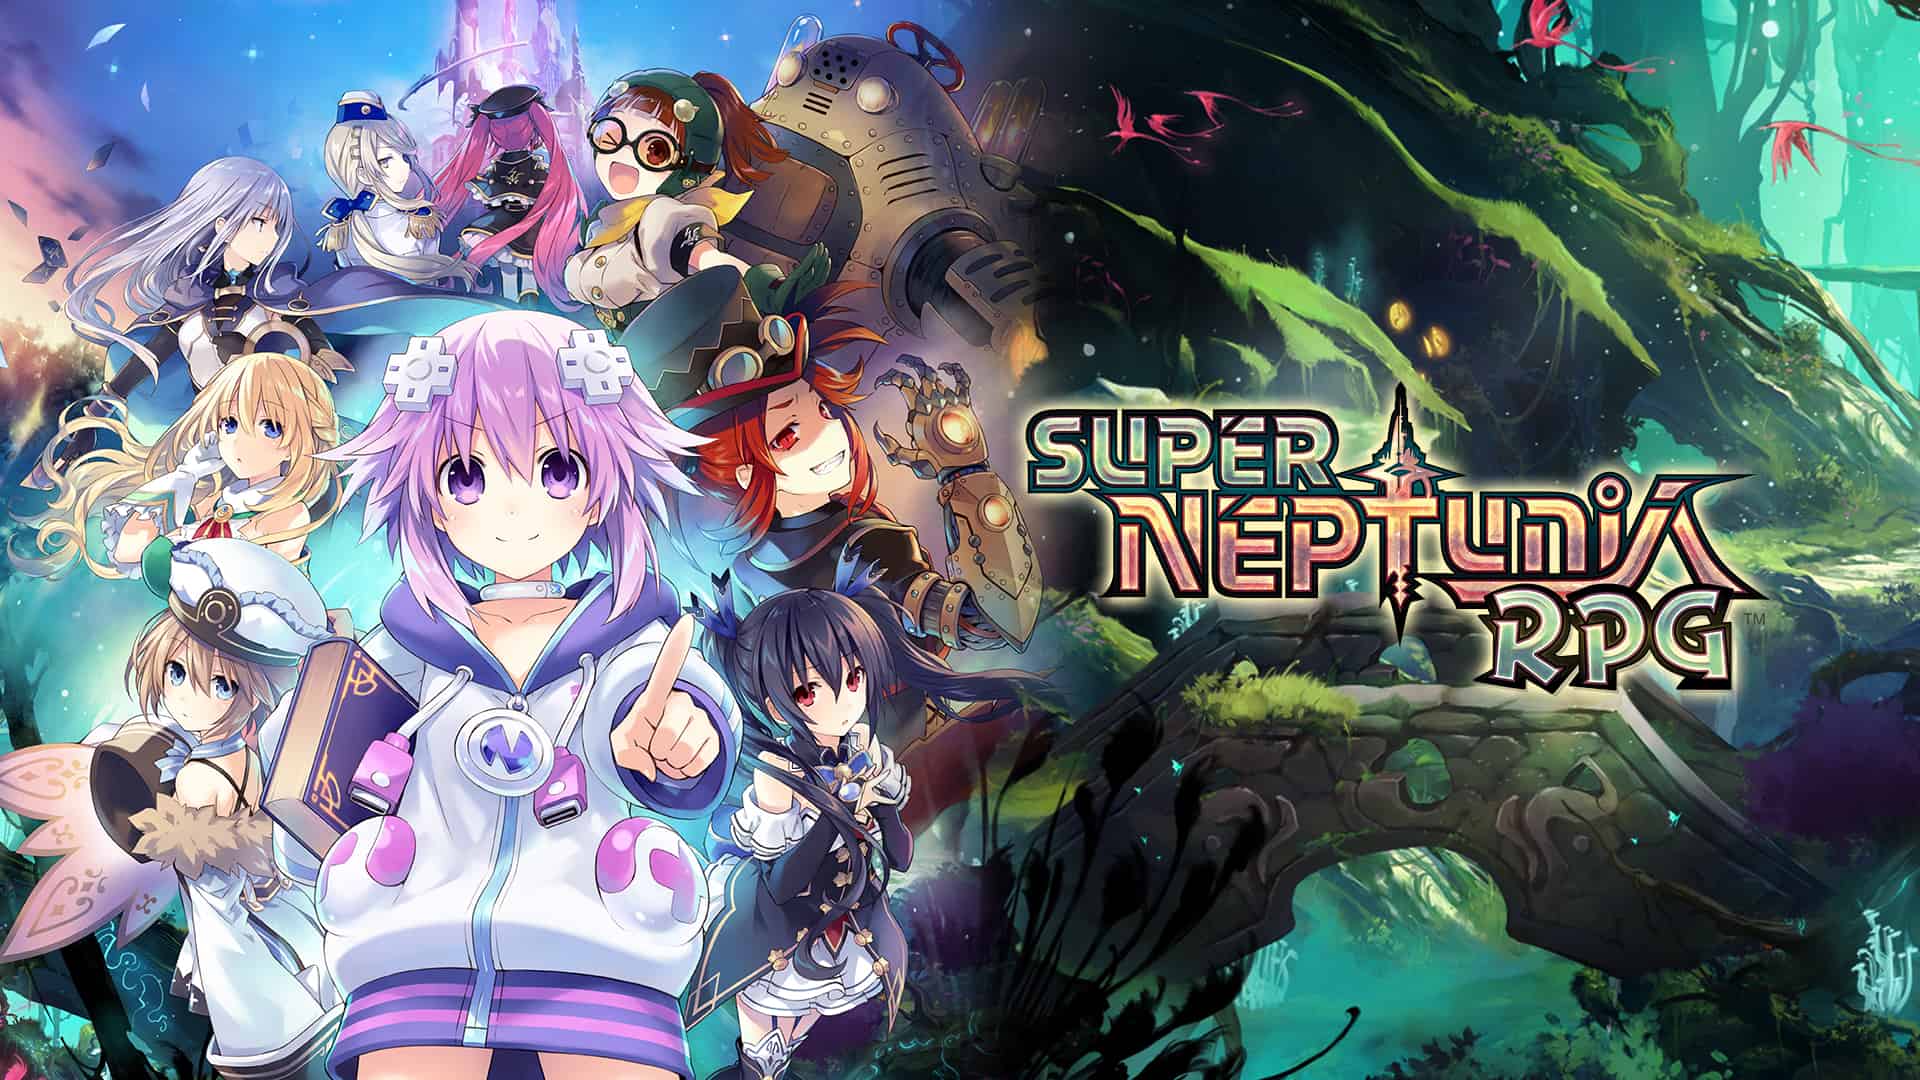 Super Neptunia RPG Out Now Across Australia For Playstation 4 & Nintendo Switch